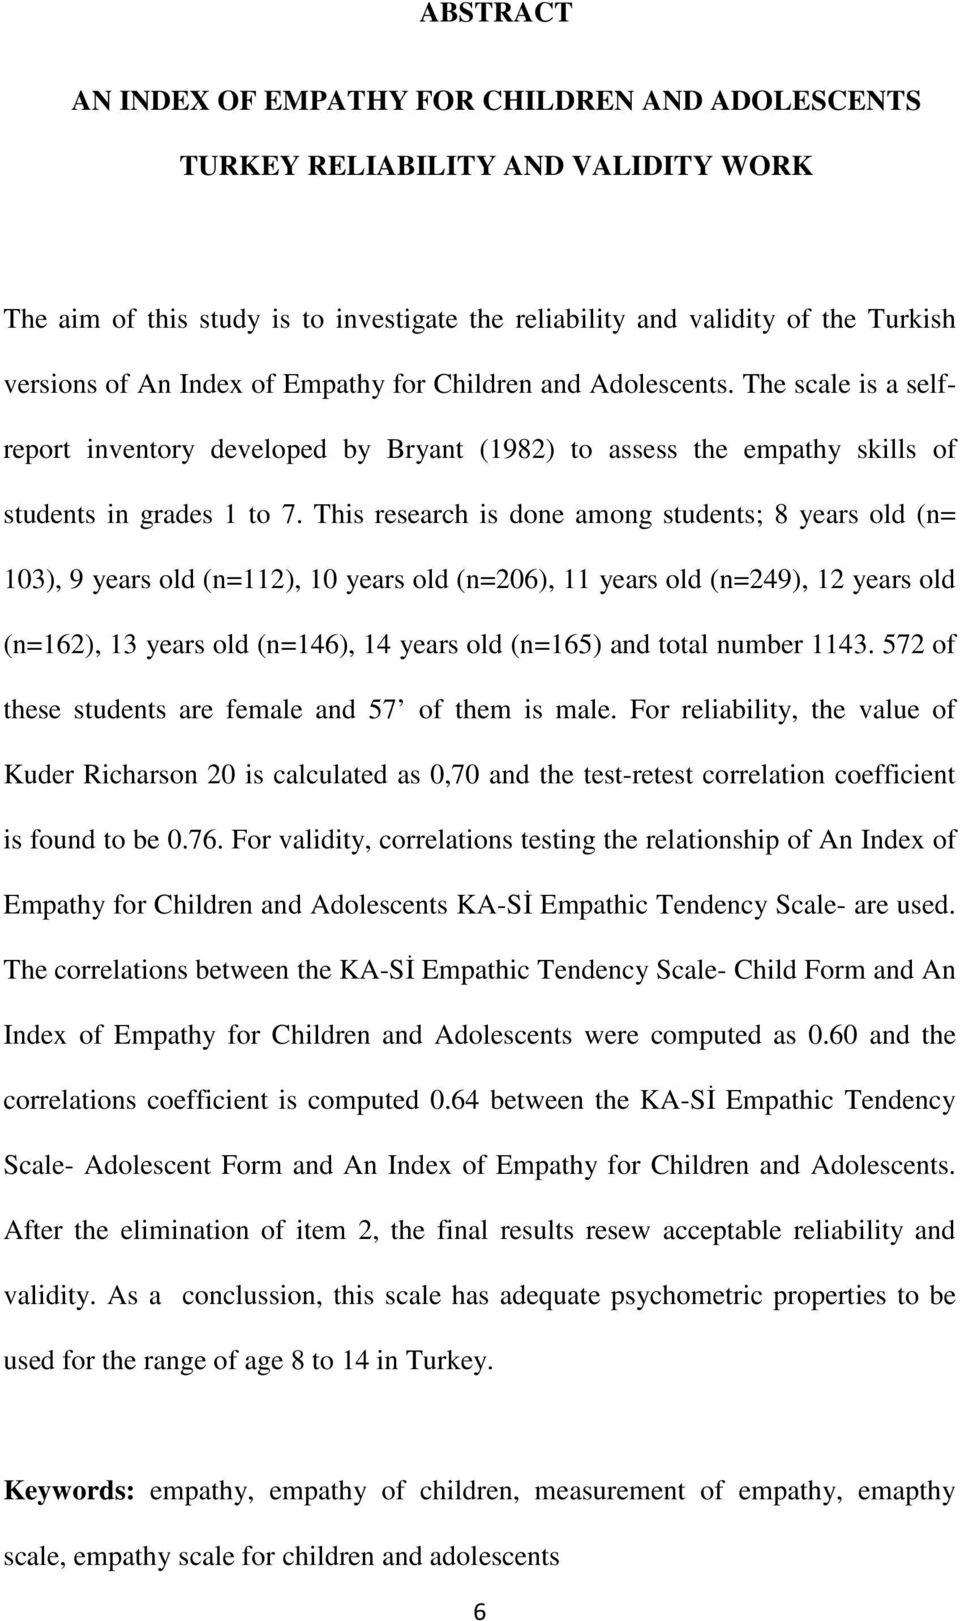 This research is done among students; 8 years old (n= 103), 9 years old (n=112), 10 years old (n=206), 11 years old (n=249), 12 years old (n=162), 13 years old (n=146), 14 years old (n=165) and total